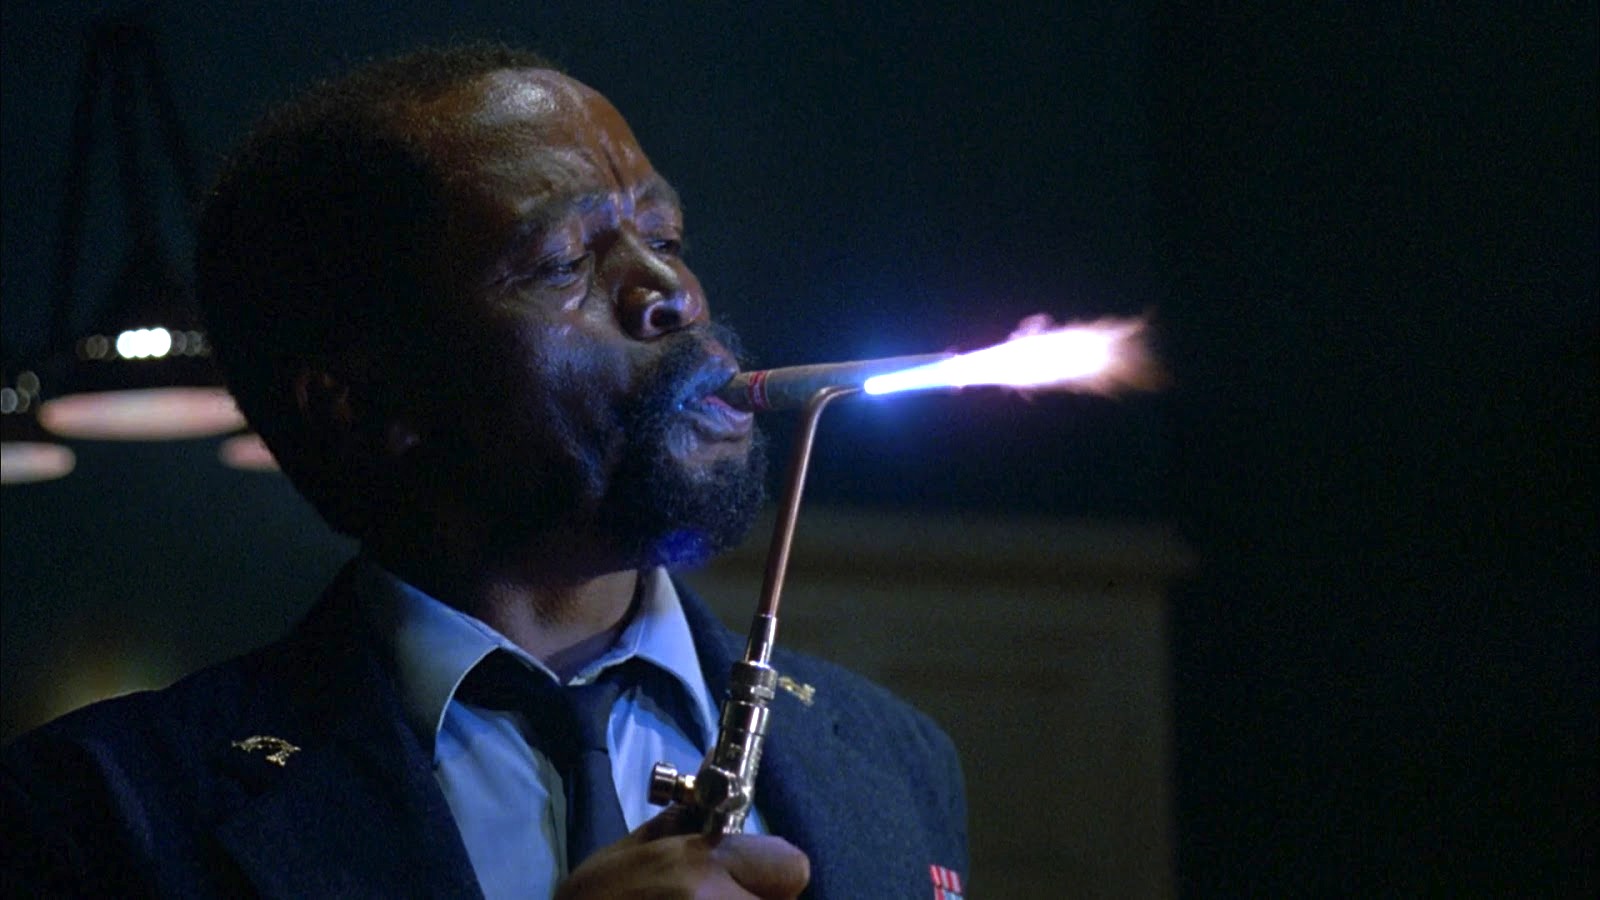 Zakes Mokae as Dargent Peytraud in Wes Craven's The Serpent and the Rainbow